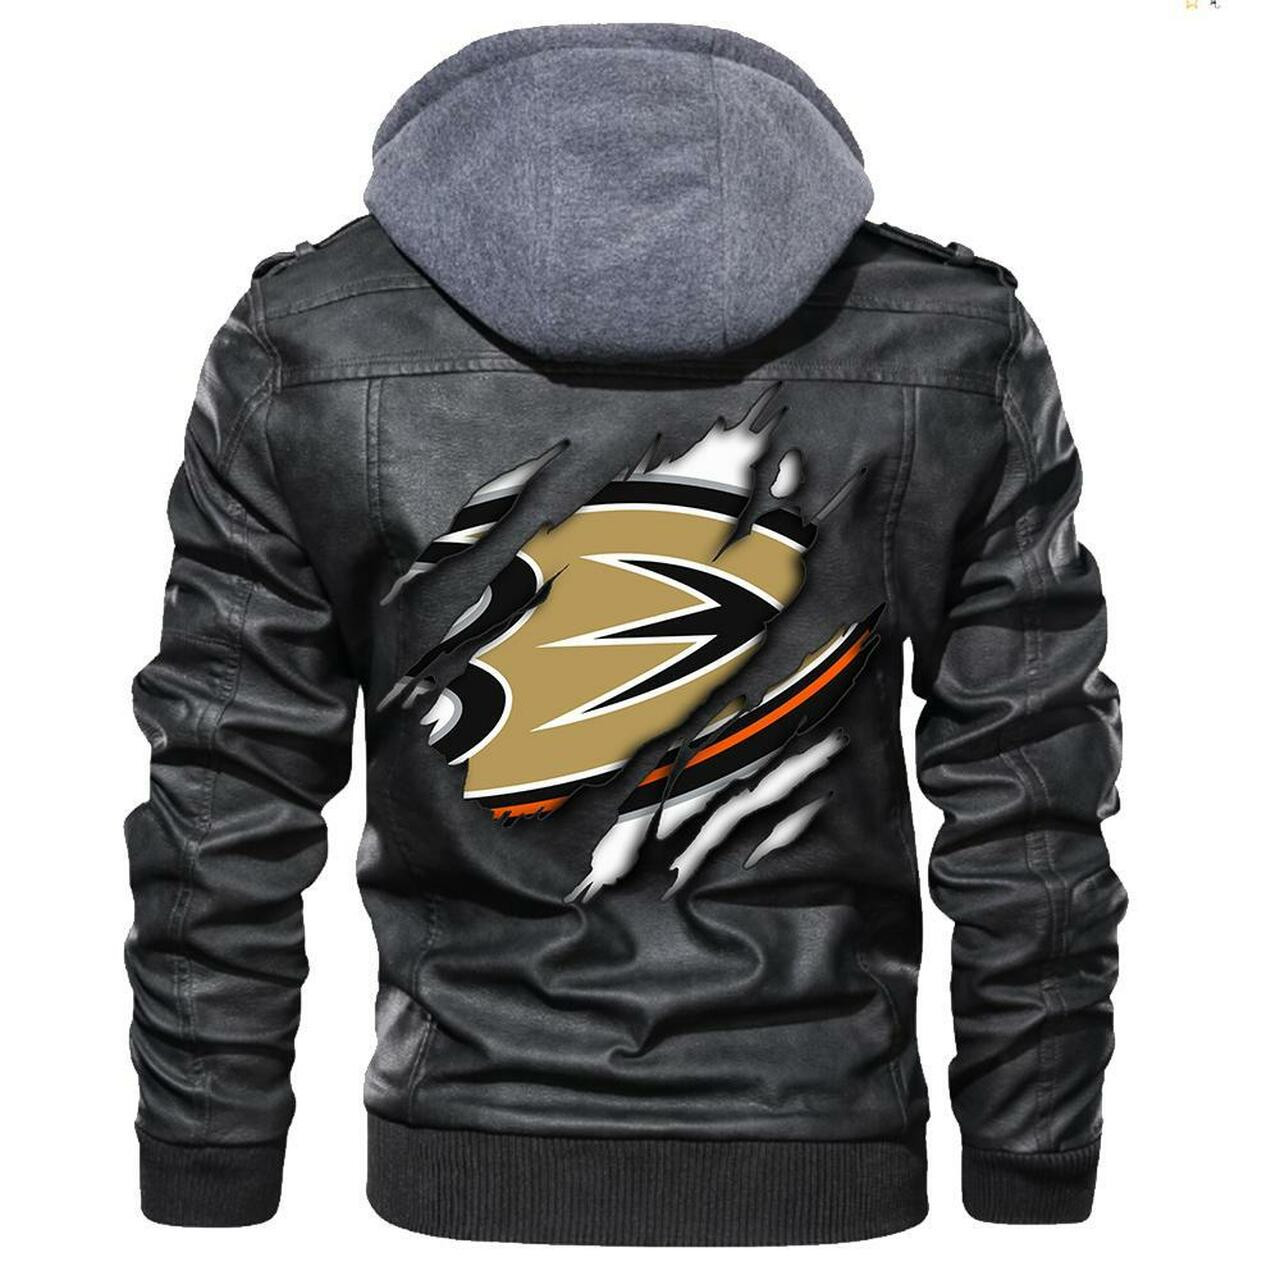 Are you looking for a great leather jacket? 243